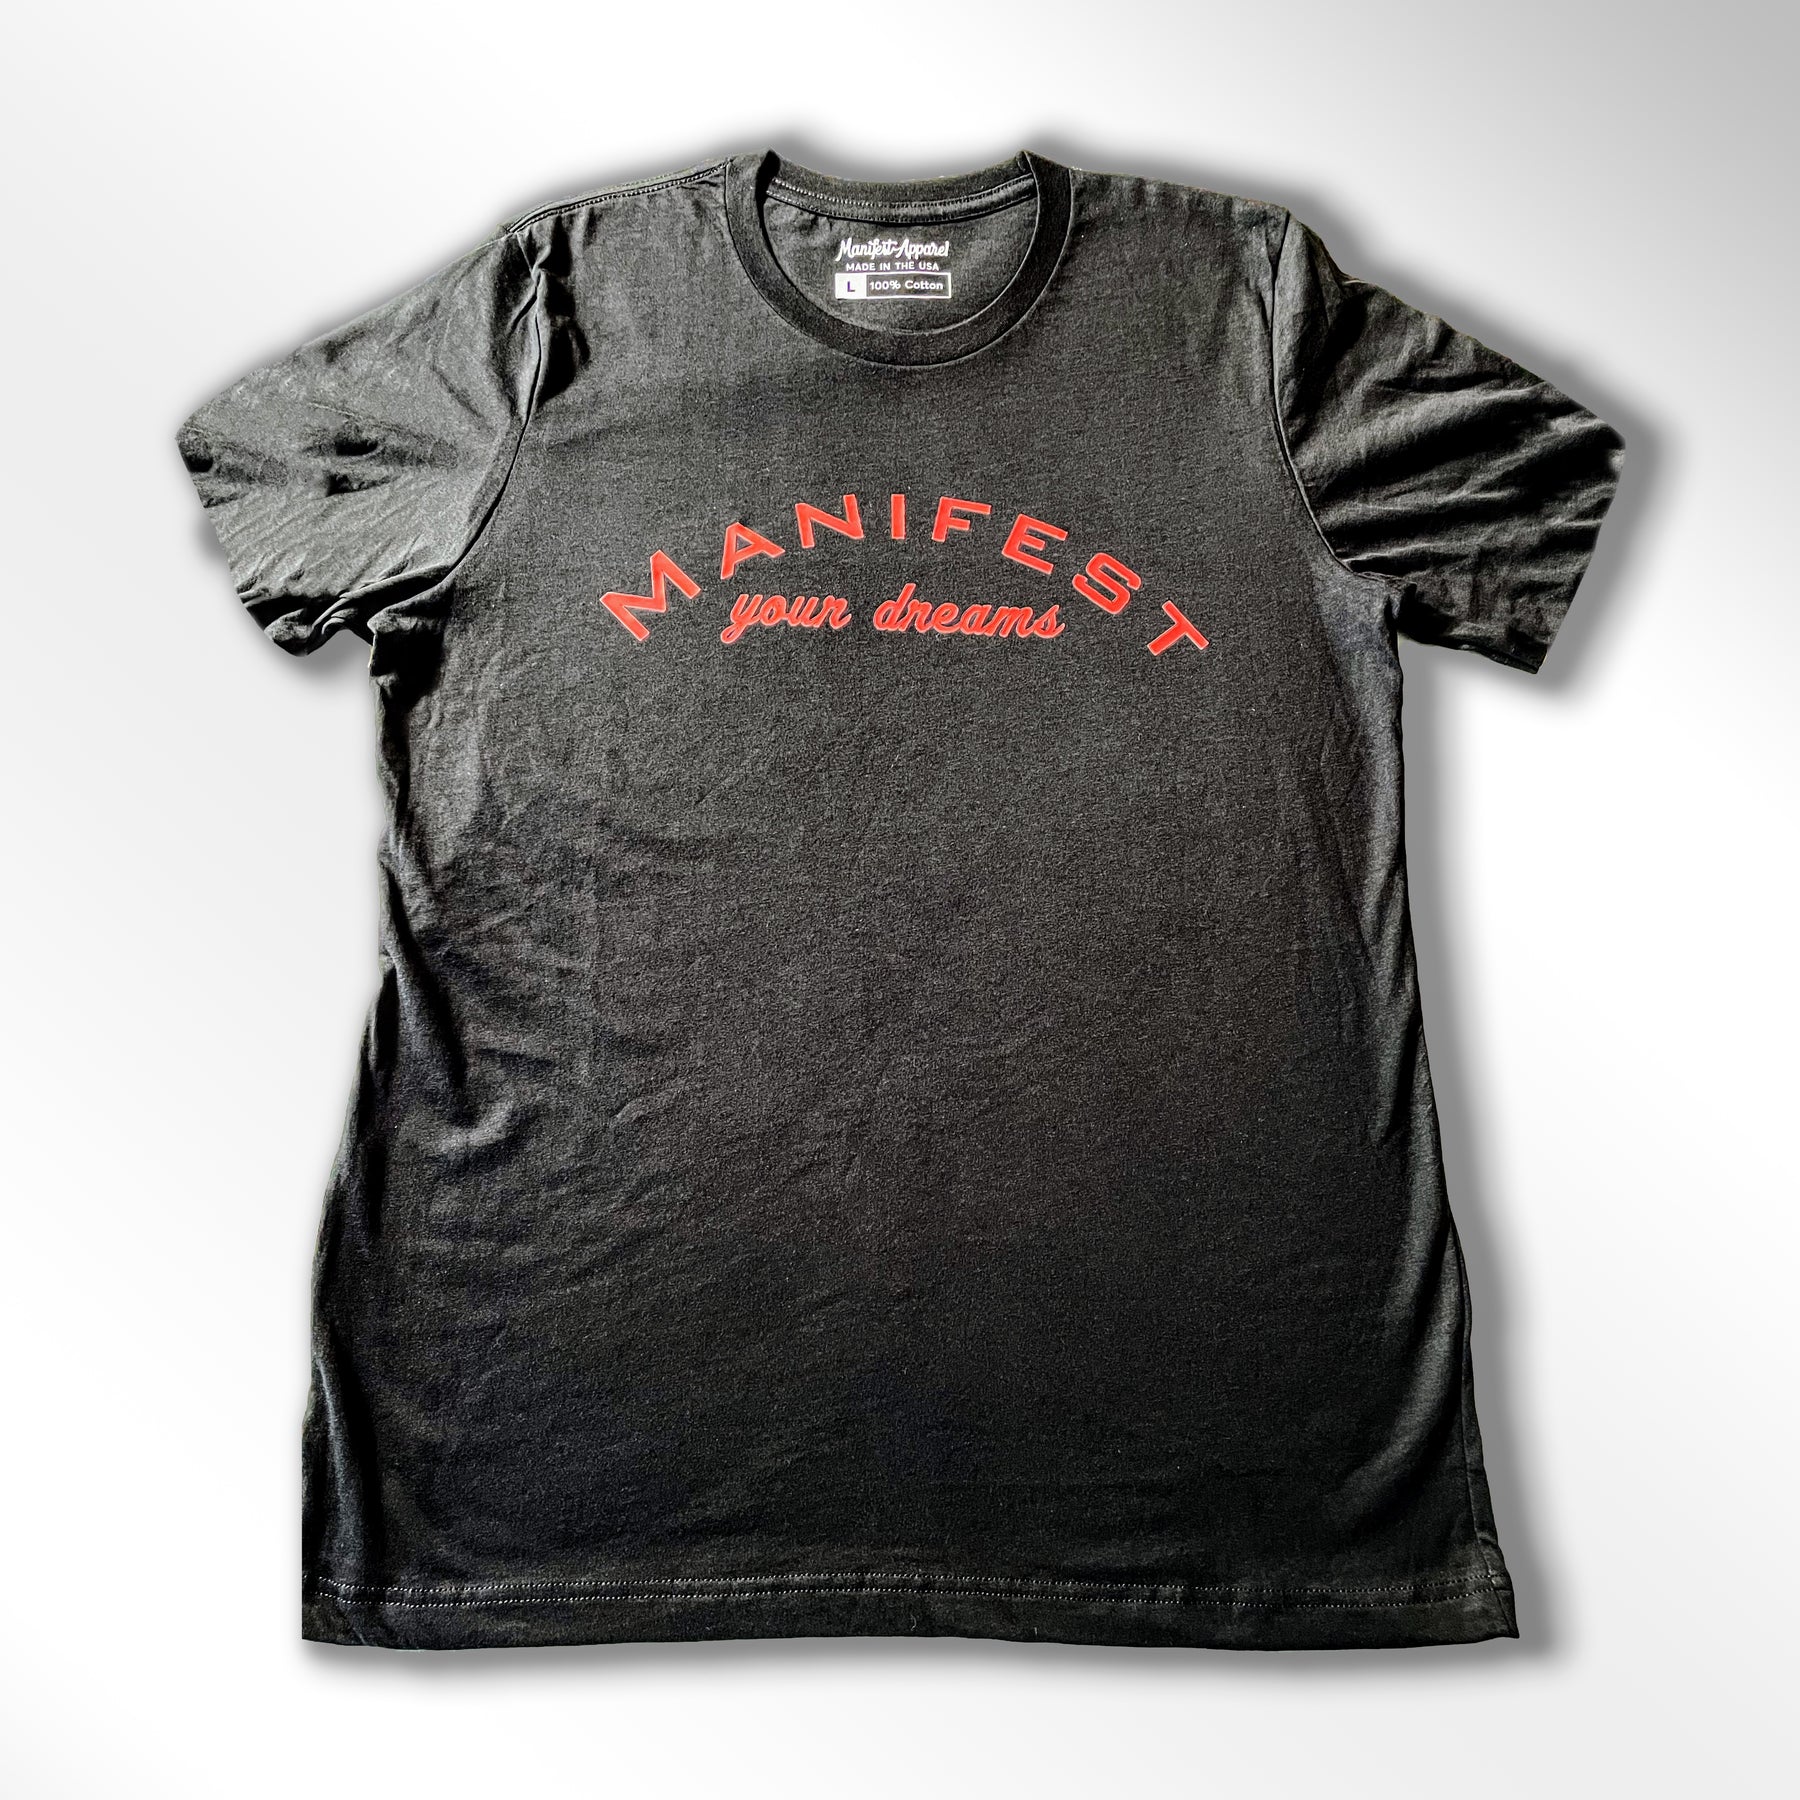 Black and Red Logo Manifest Your Dreams Shirt